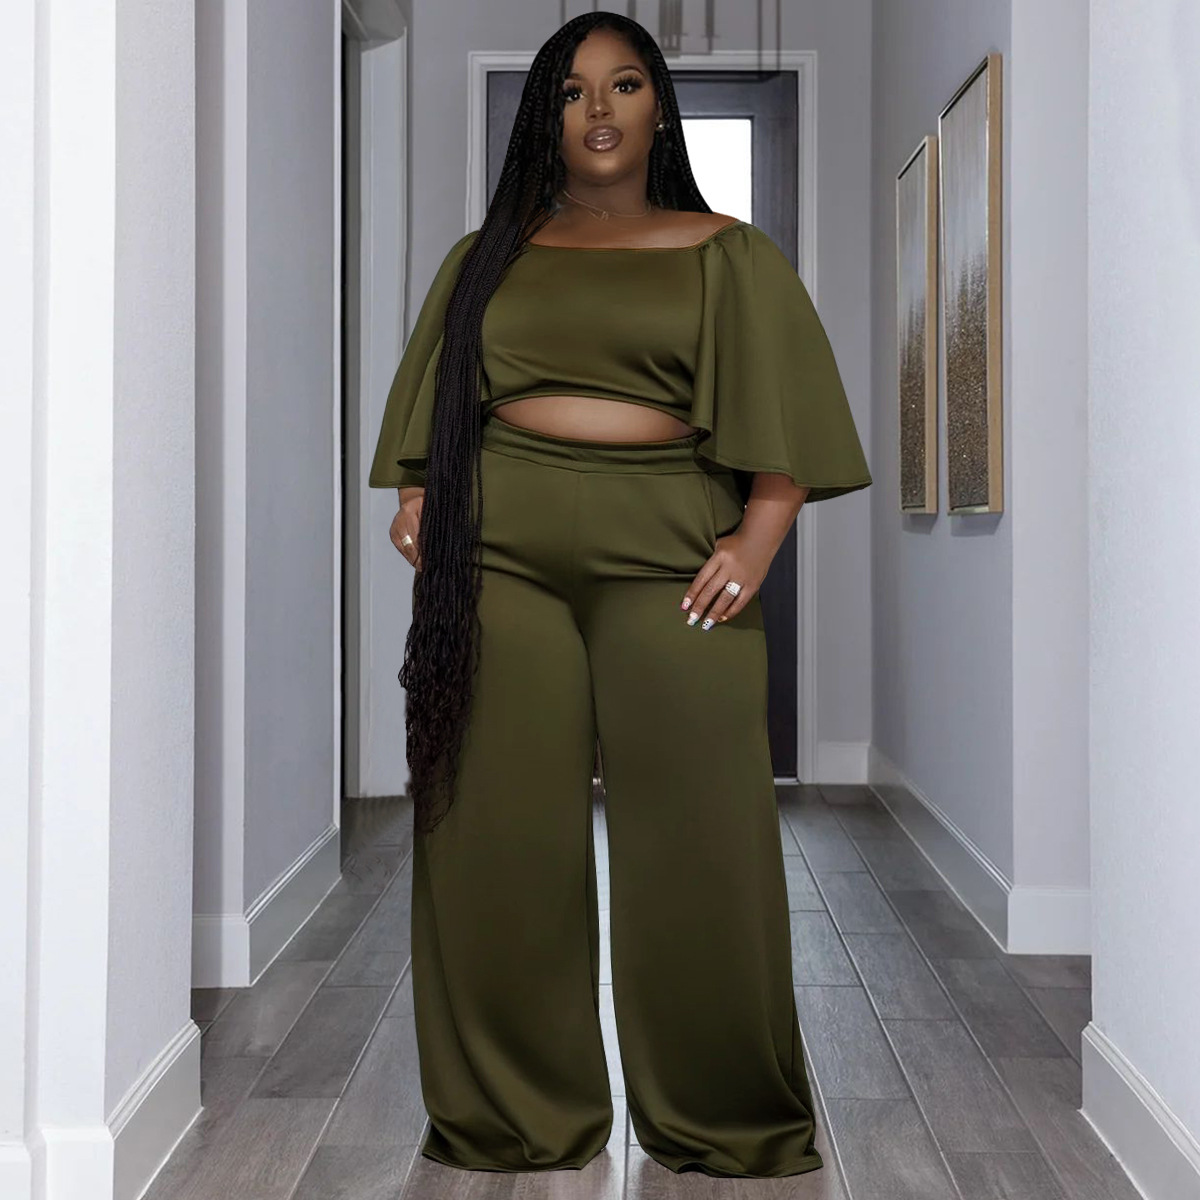 Plus Size Women Summer Short Sleeve Top and Pants Casual Two-Piece Set -  The Little Connection